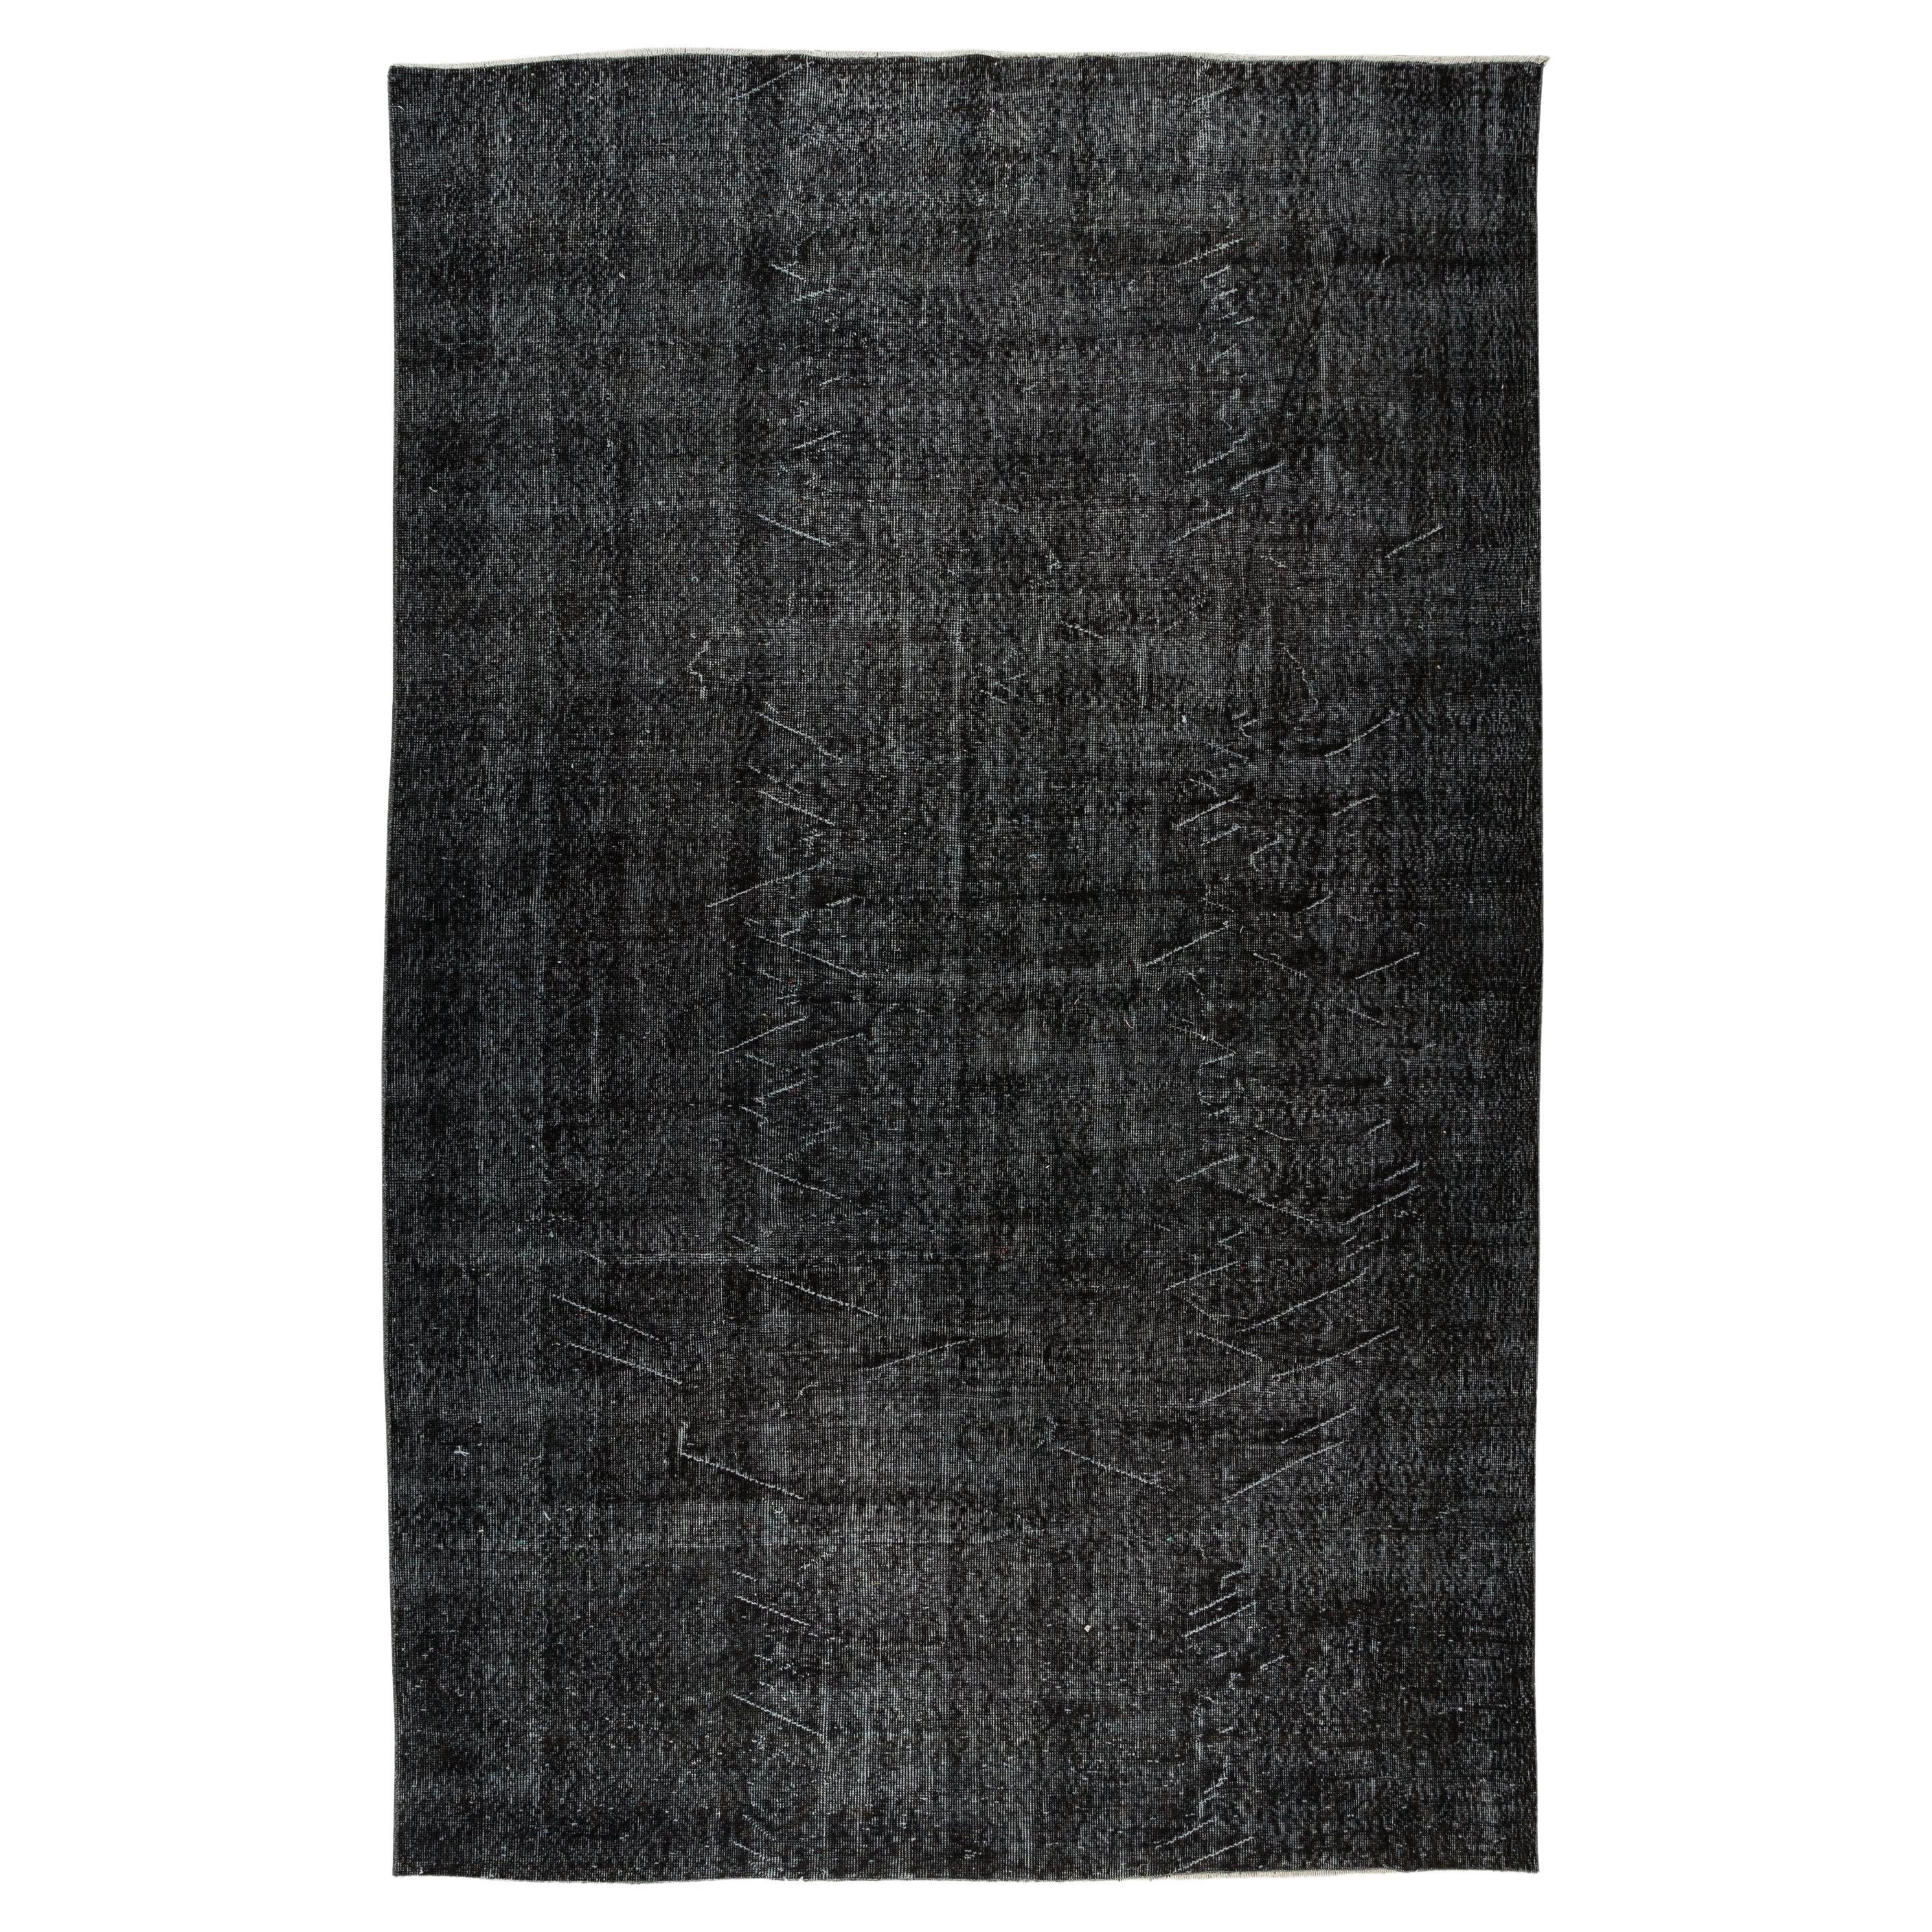 7x10.5 Ft Handknotted Vintage Turkish Rug Over-Dyed in Black for Modern Interior For Sale